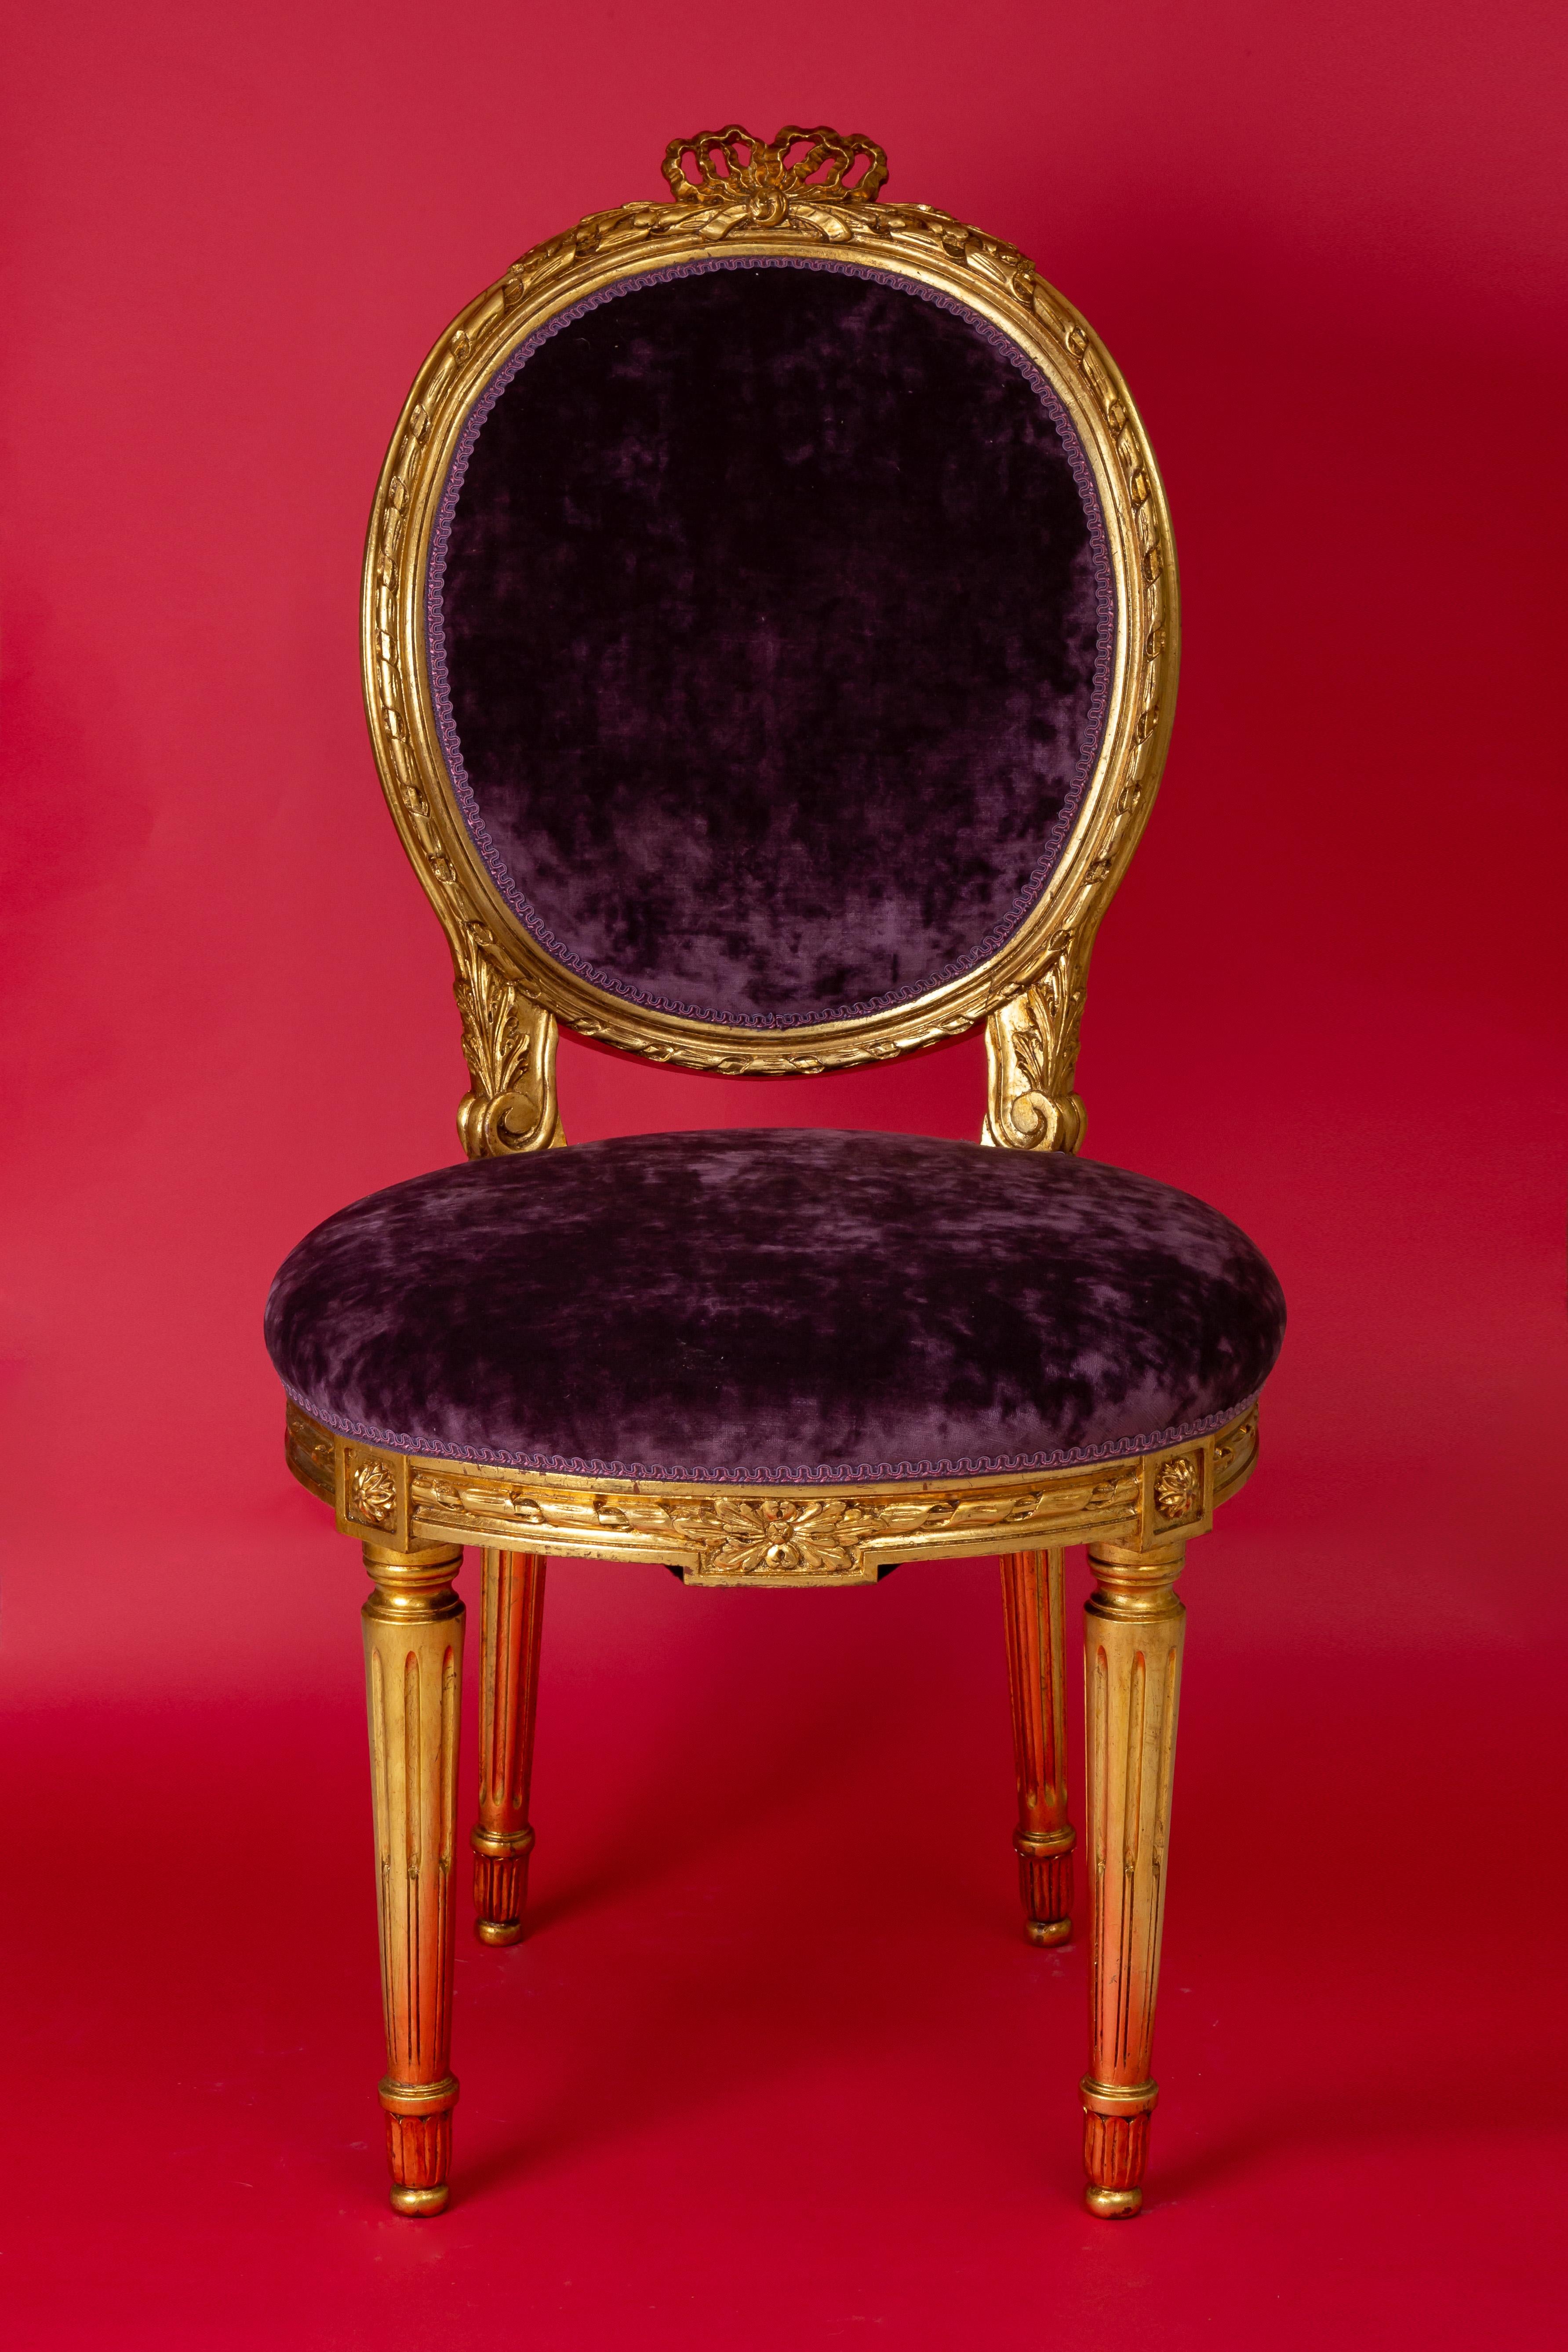 Original hand carved wood frame from the 19th century, round shape newly gilded with 24-karat gold leaves
Newly upholstered with elegant and luxurious deep purple velvet
Measures: Height 101 cm, width 50 cm, depth 51 cm.
Wear consistent with age and